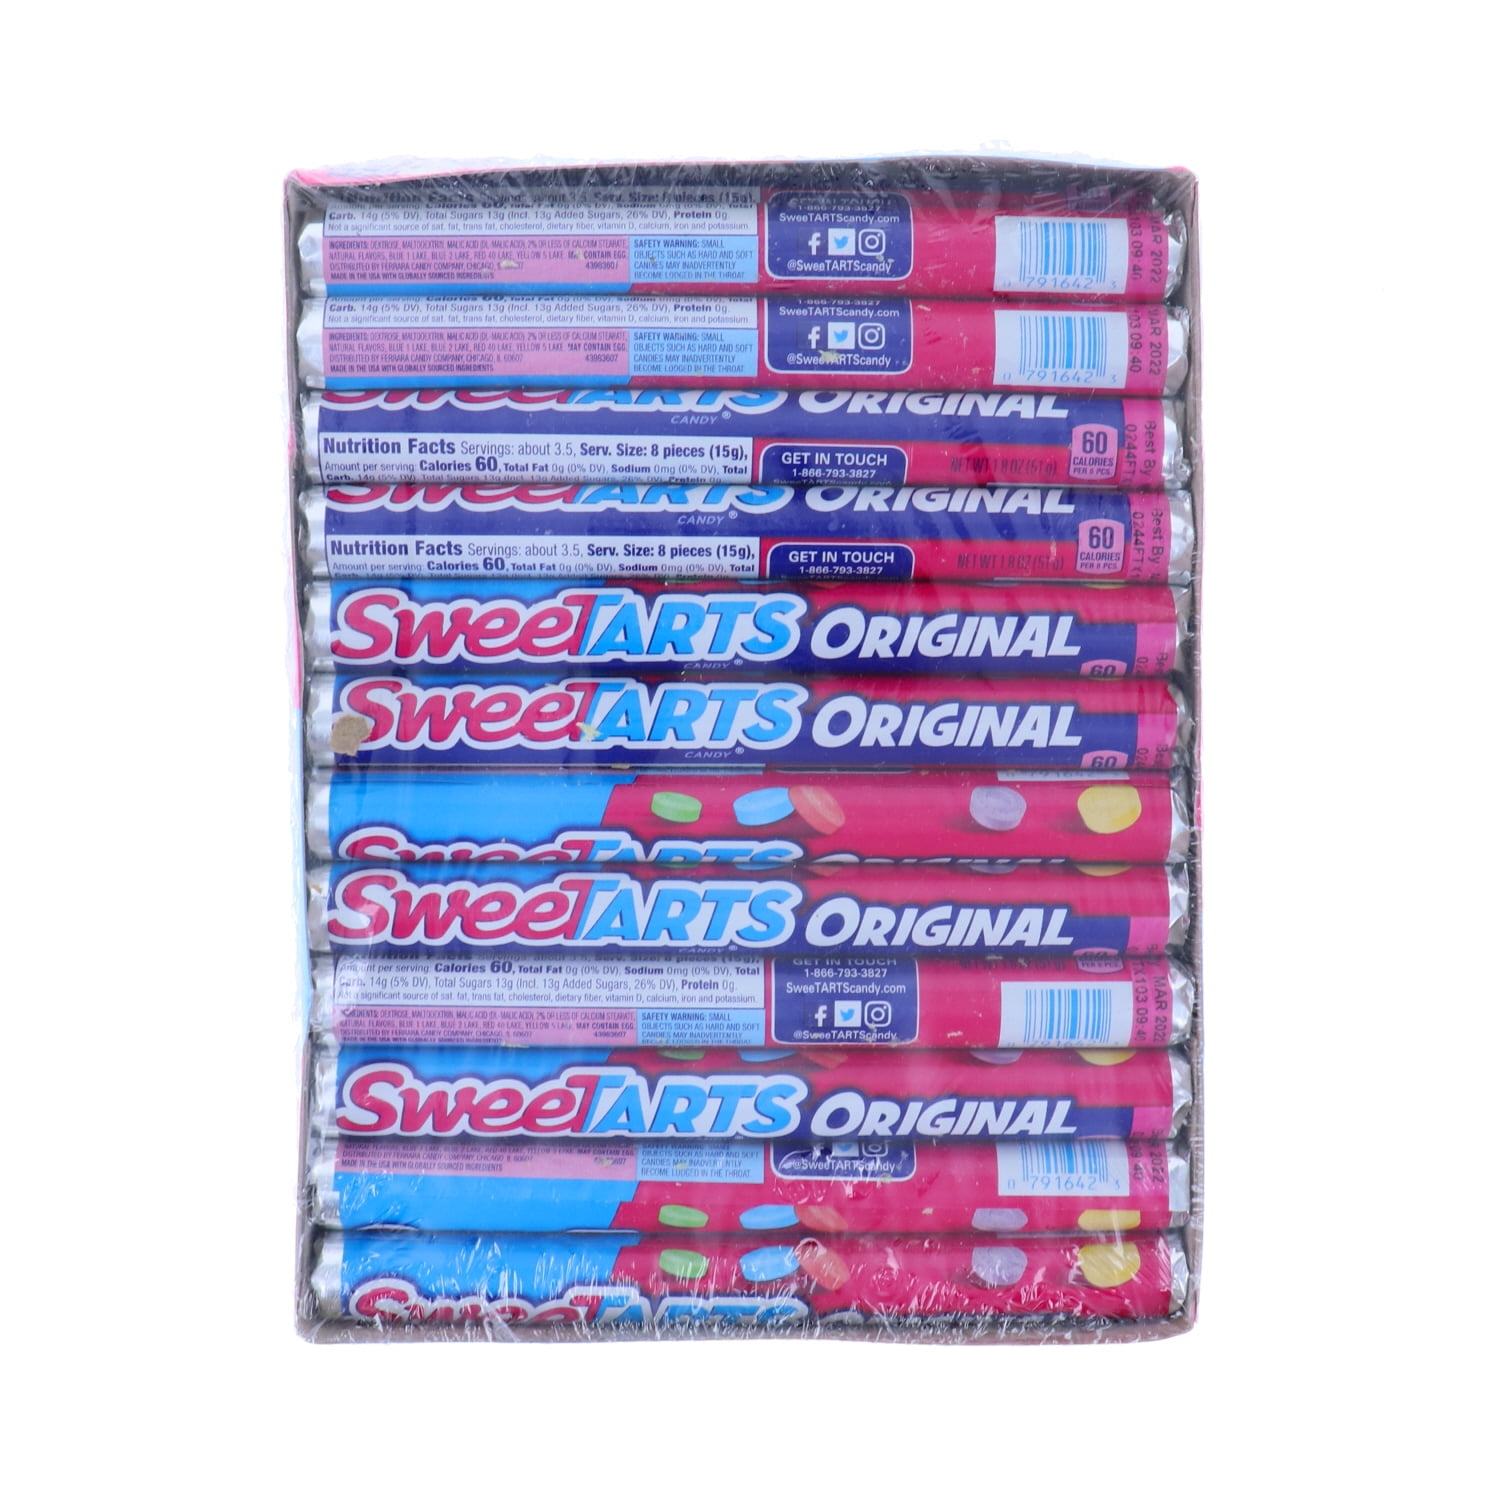 Sweetarts Chewy Sours Candy Rolls